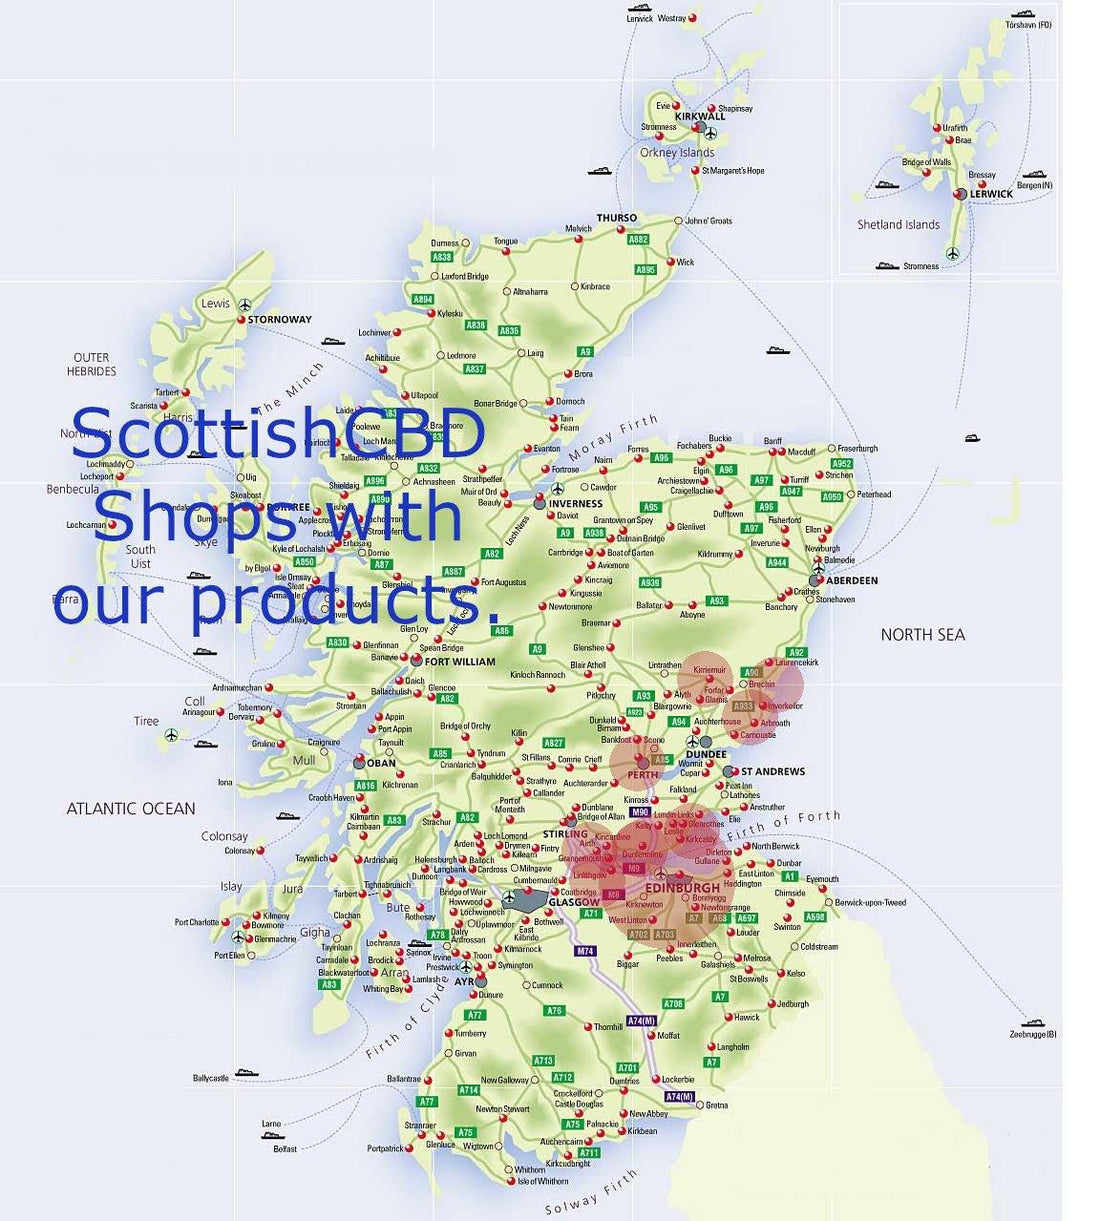 More shops where  you can get ScottishCBD products: - SCOTTISHCBD